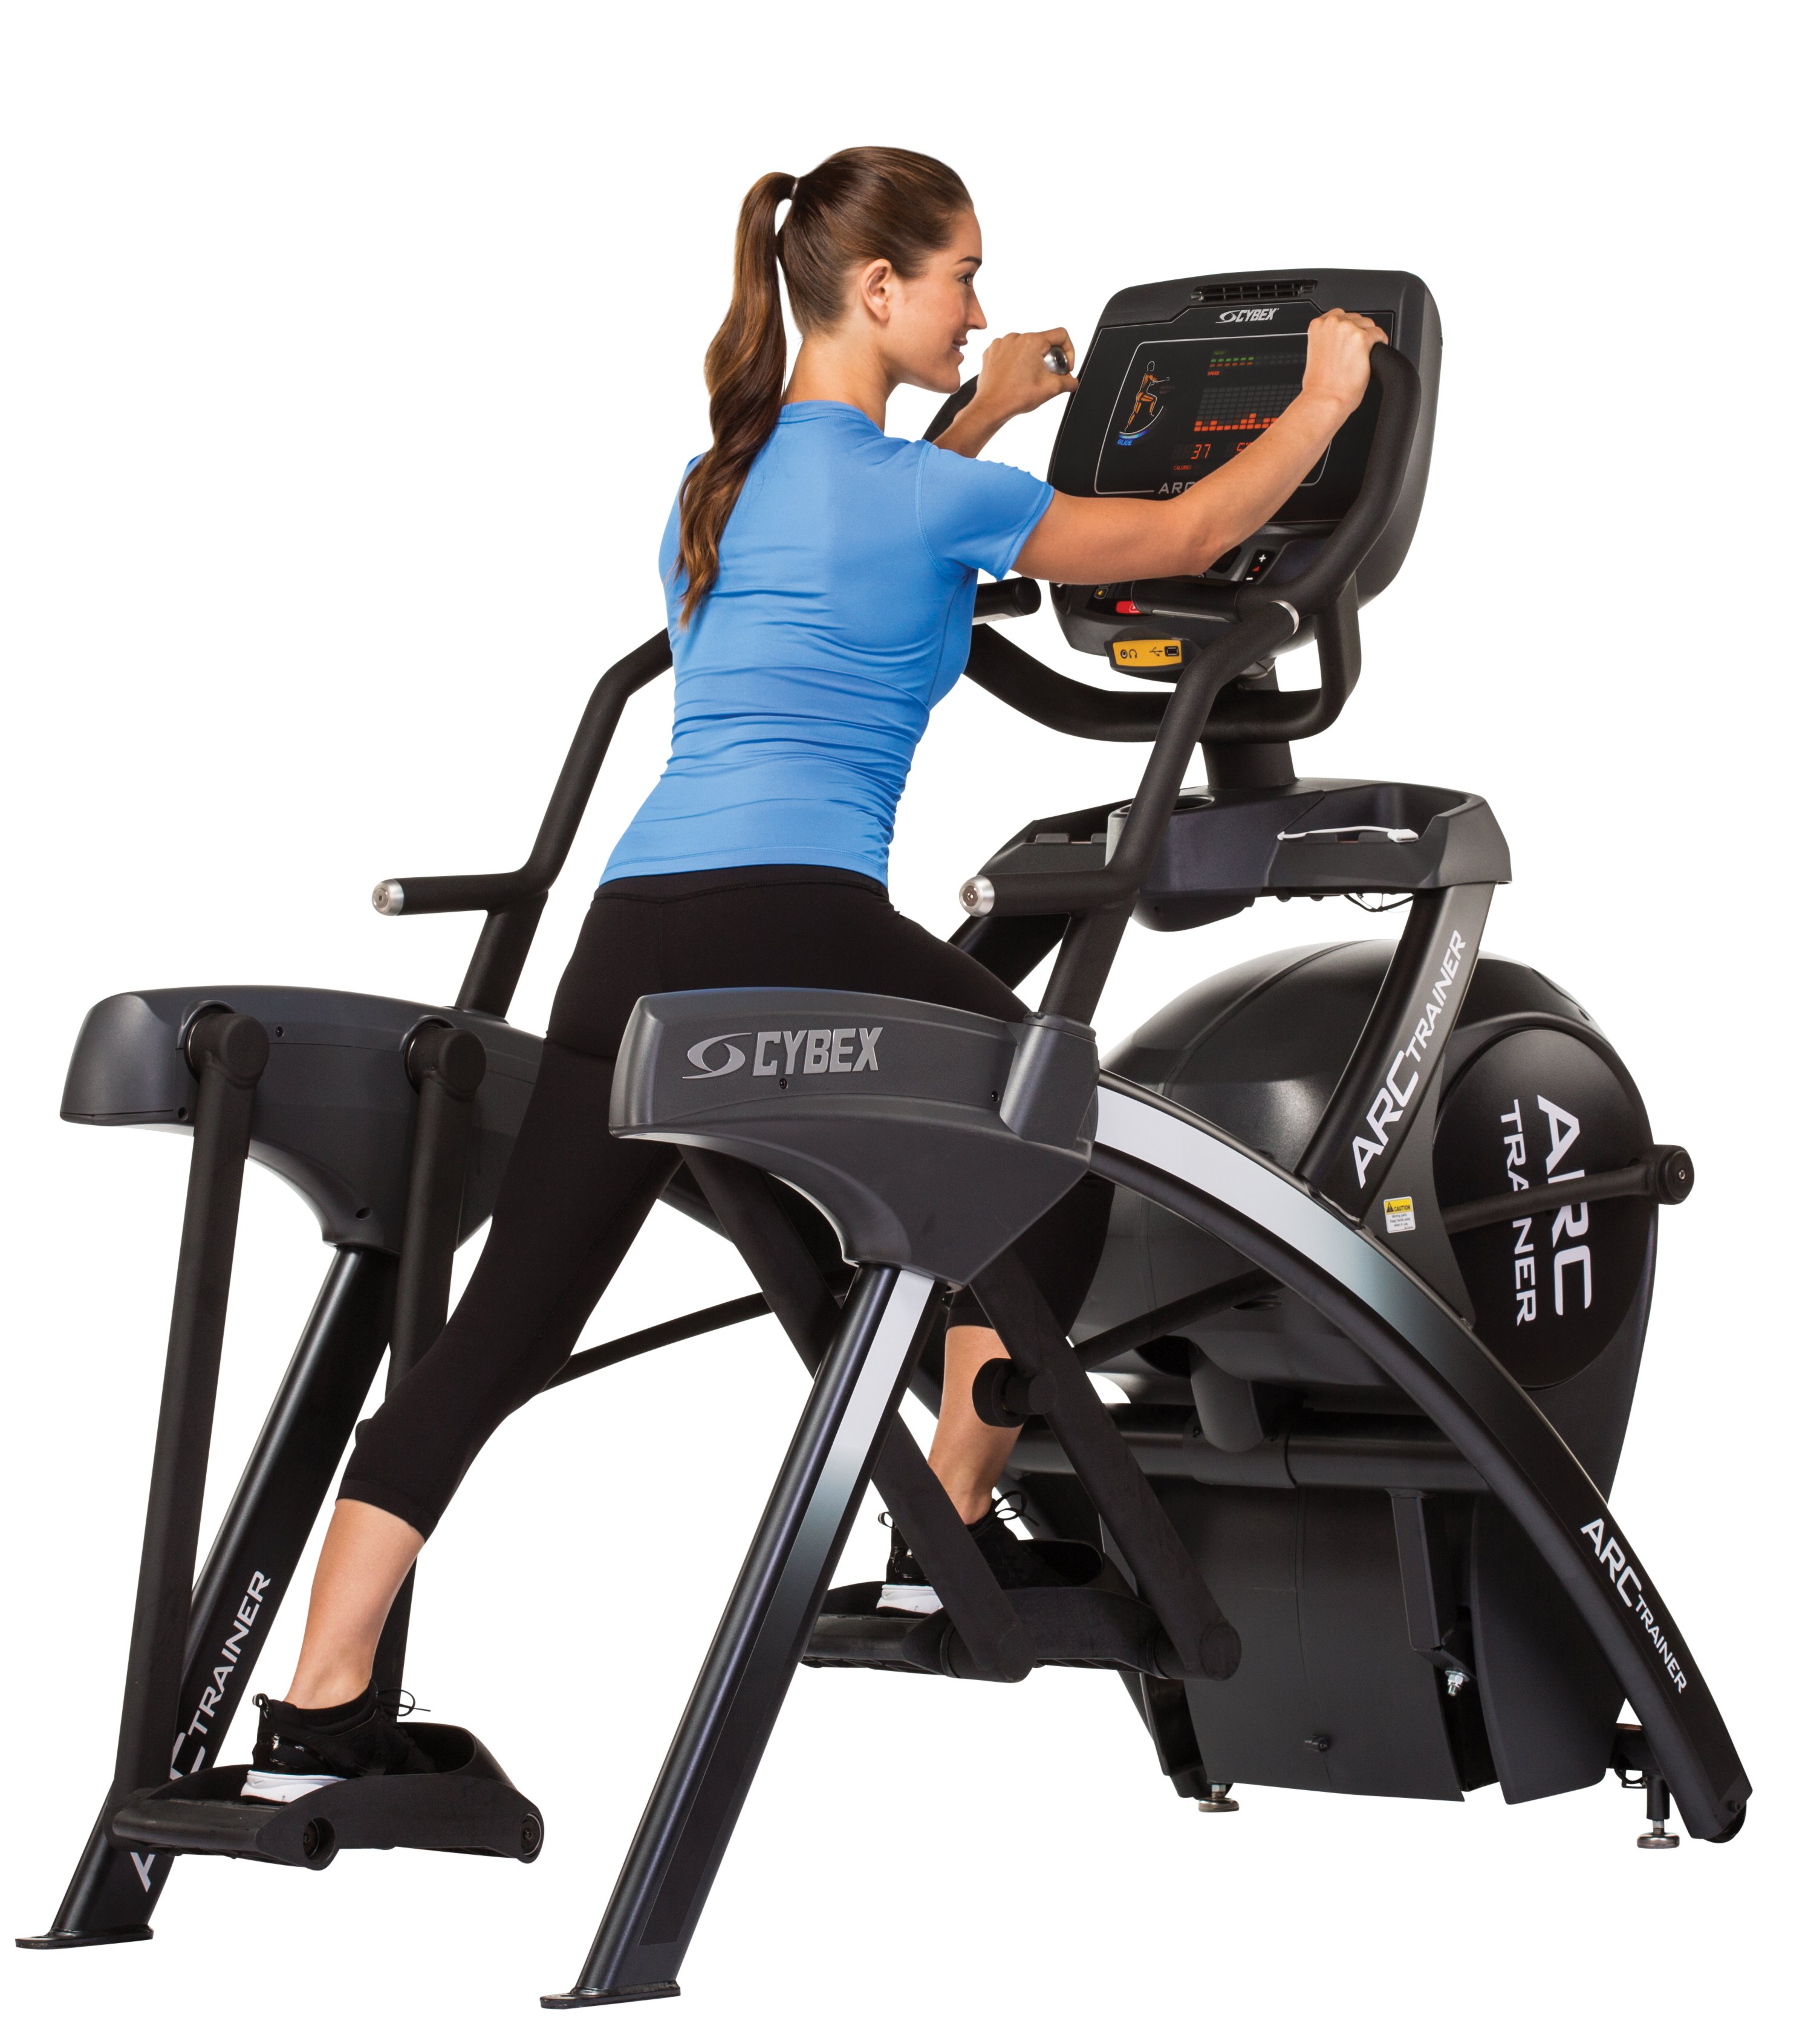 770A Arc Trainer for HIIT (High Intensity Interval Training)